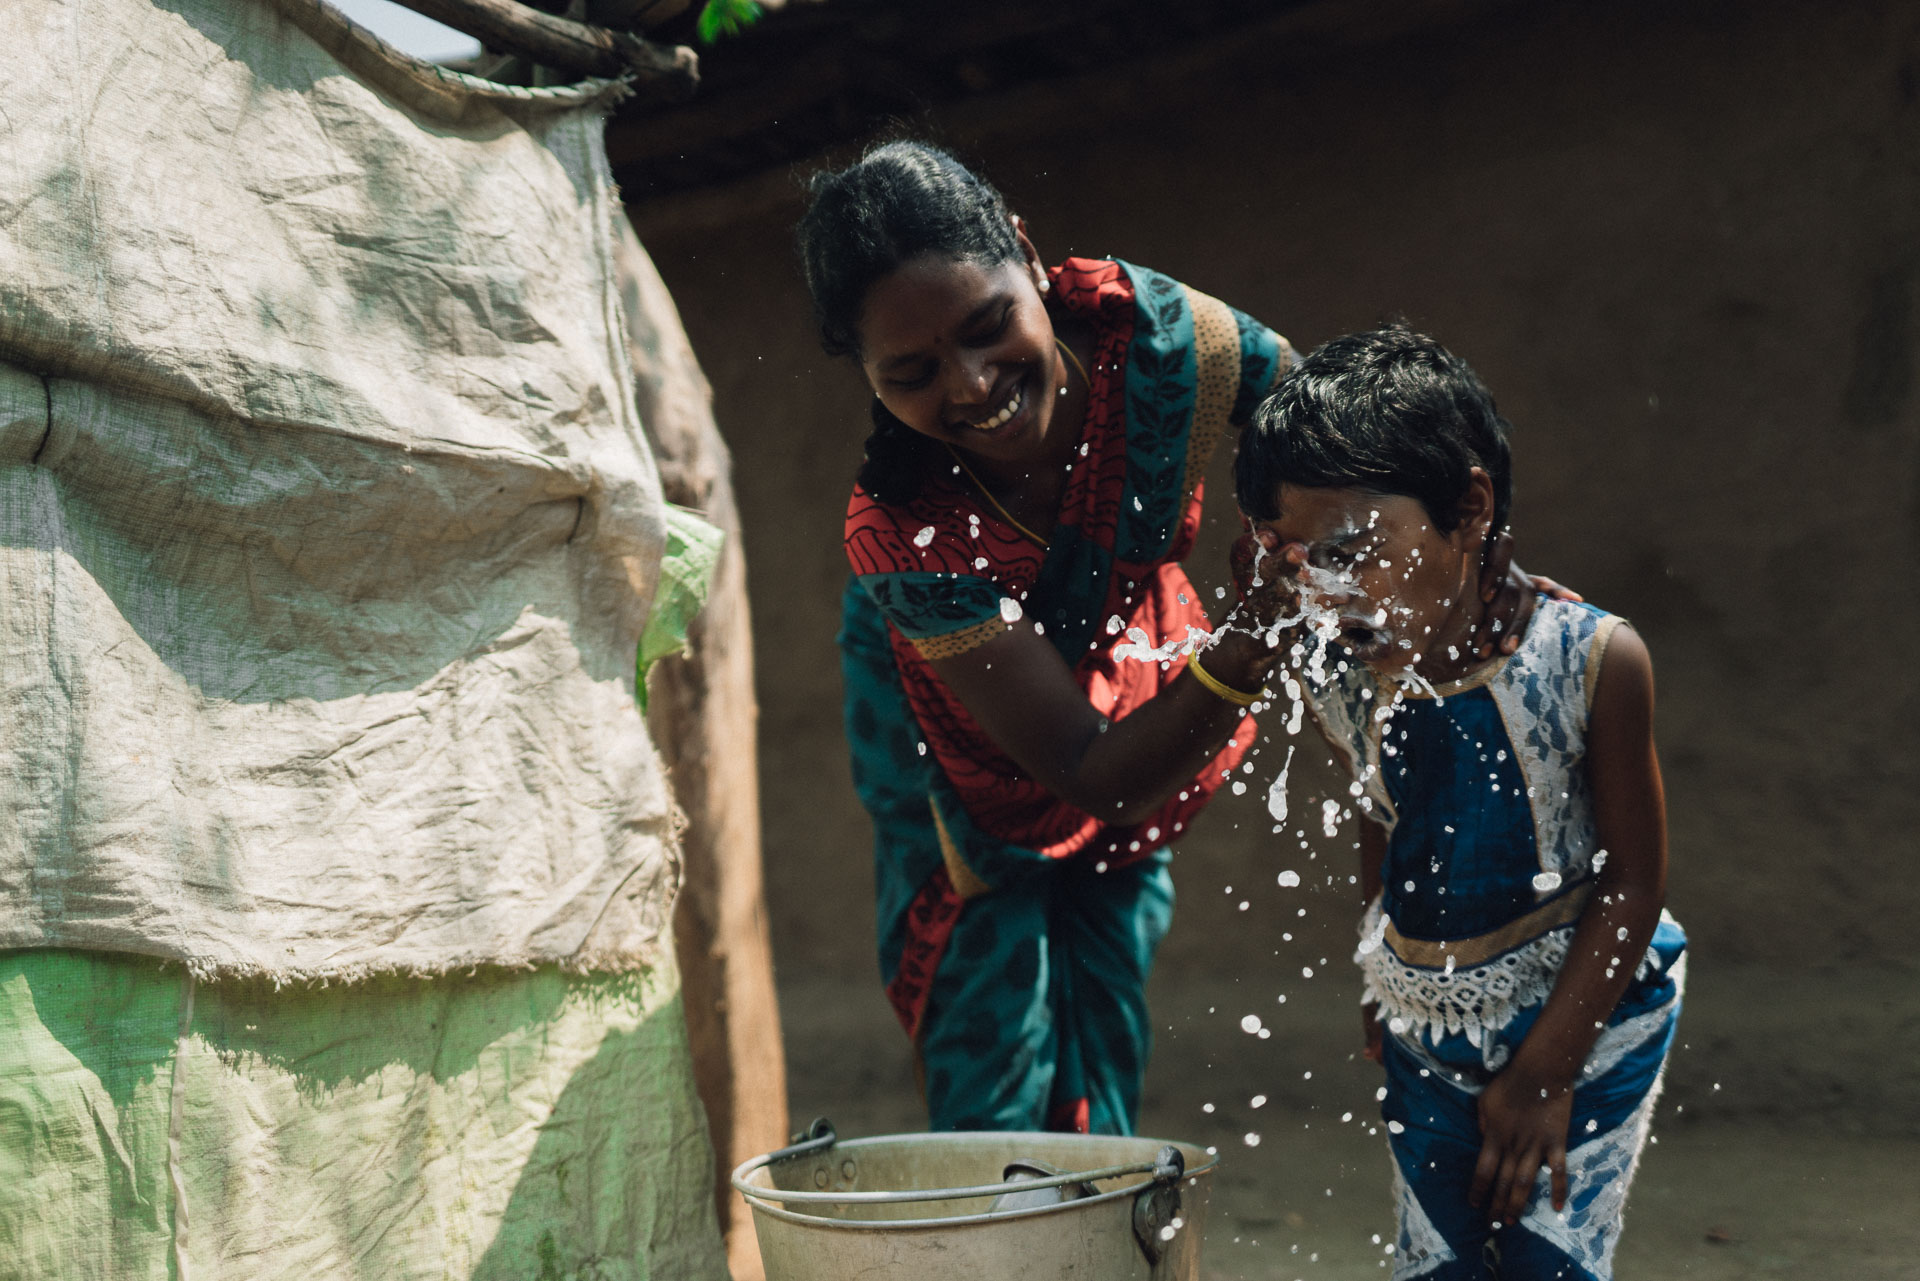 Indian Woman washing her daughter's face at outside pump